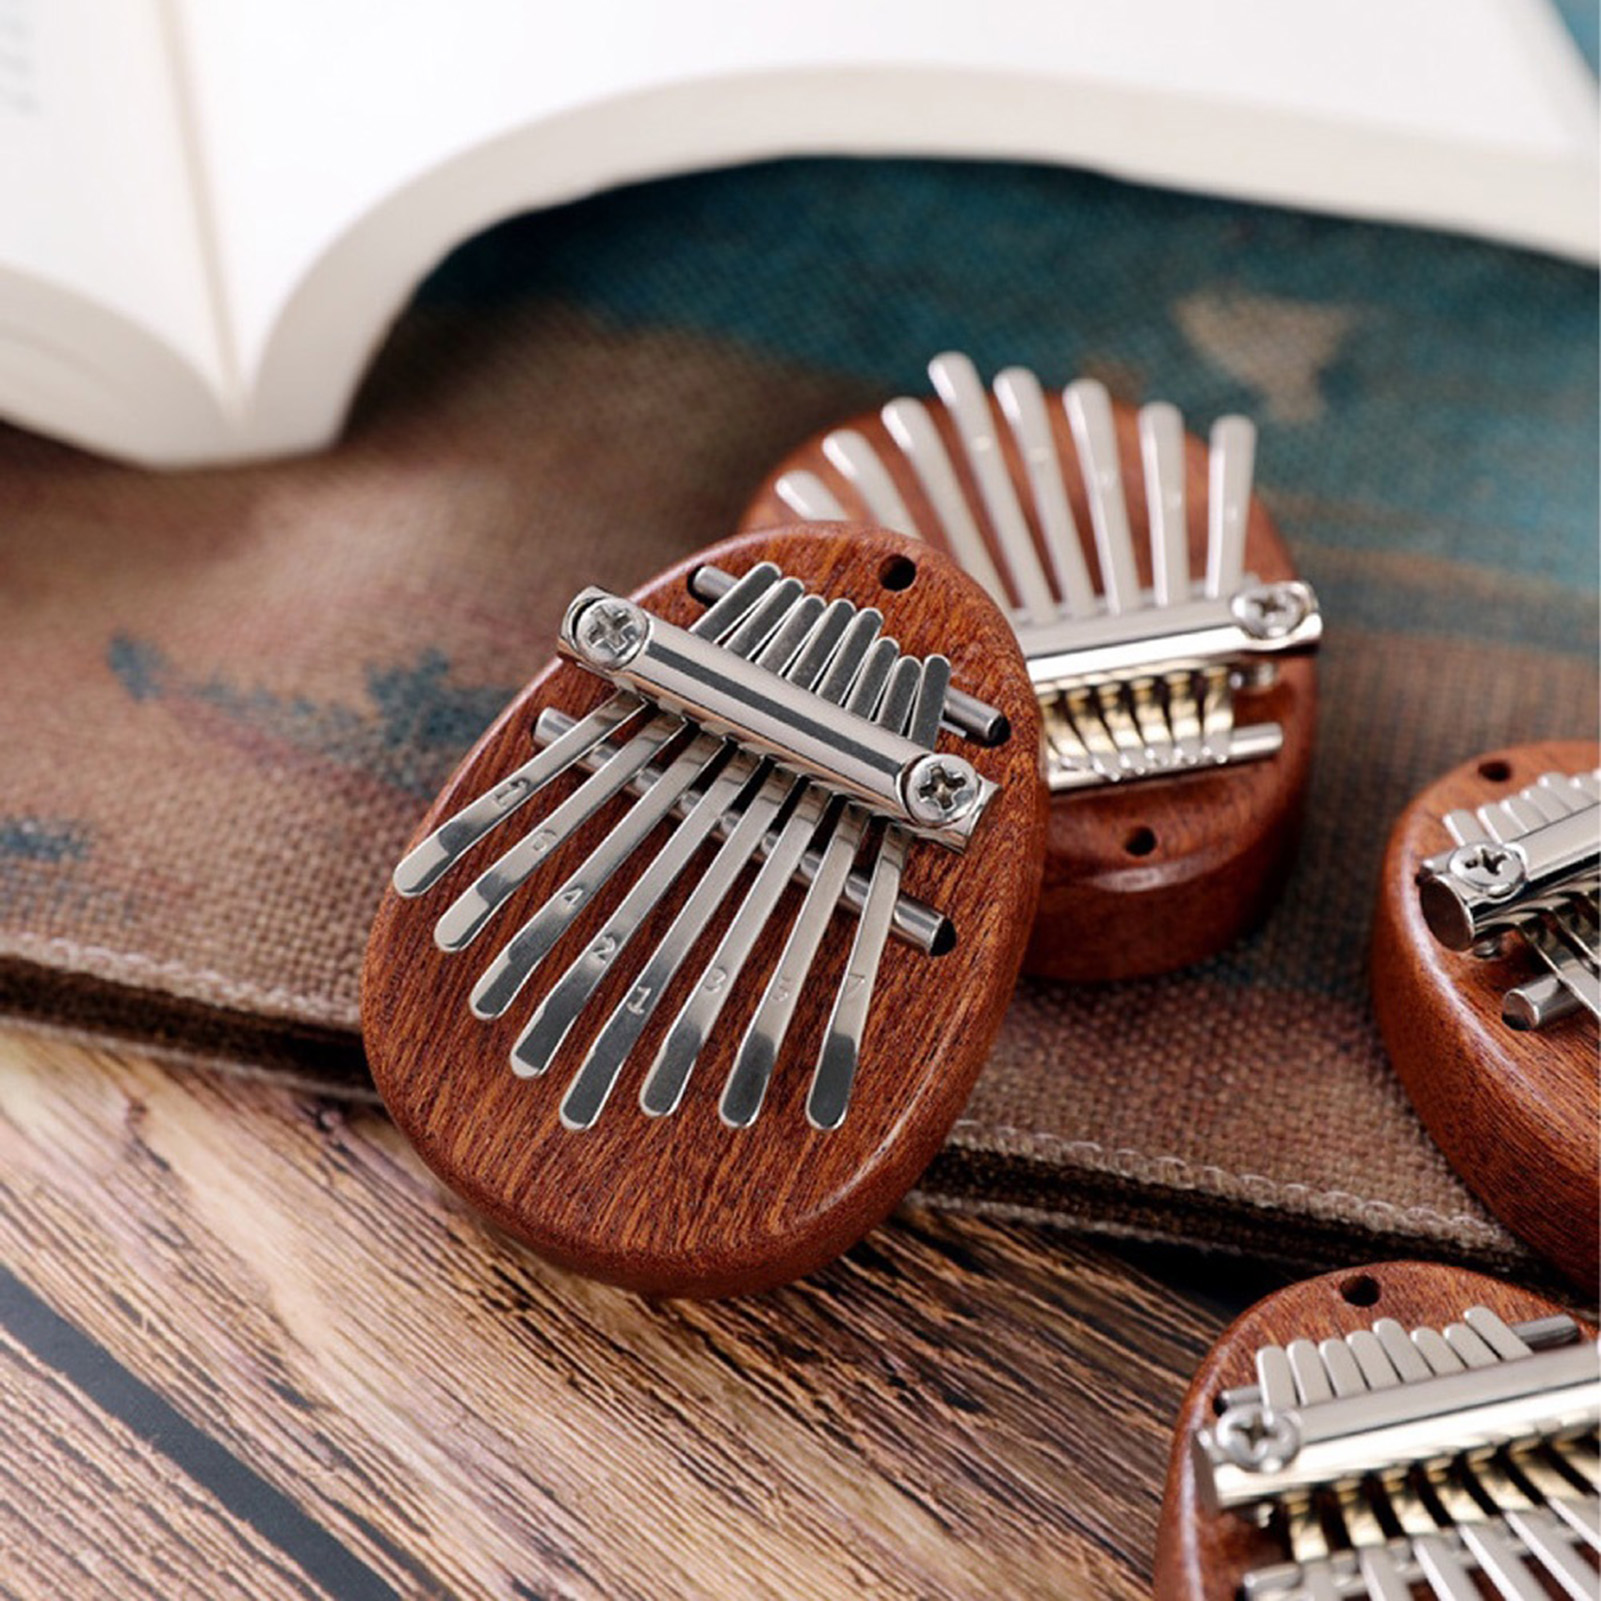 SANWOOD Thumb Piano Exquisite Fine Workmanship Musical Instrument Kalimba Finger Thumb Piano for Kids Adults Beginners - image 2 of 6